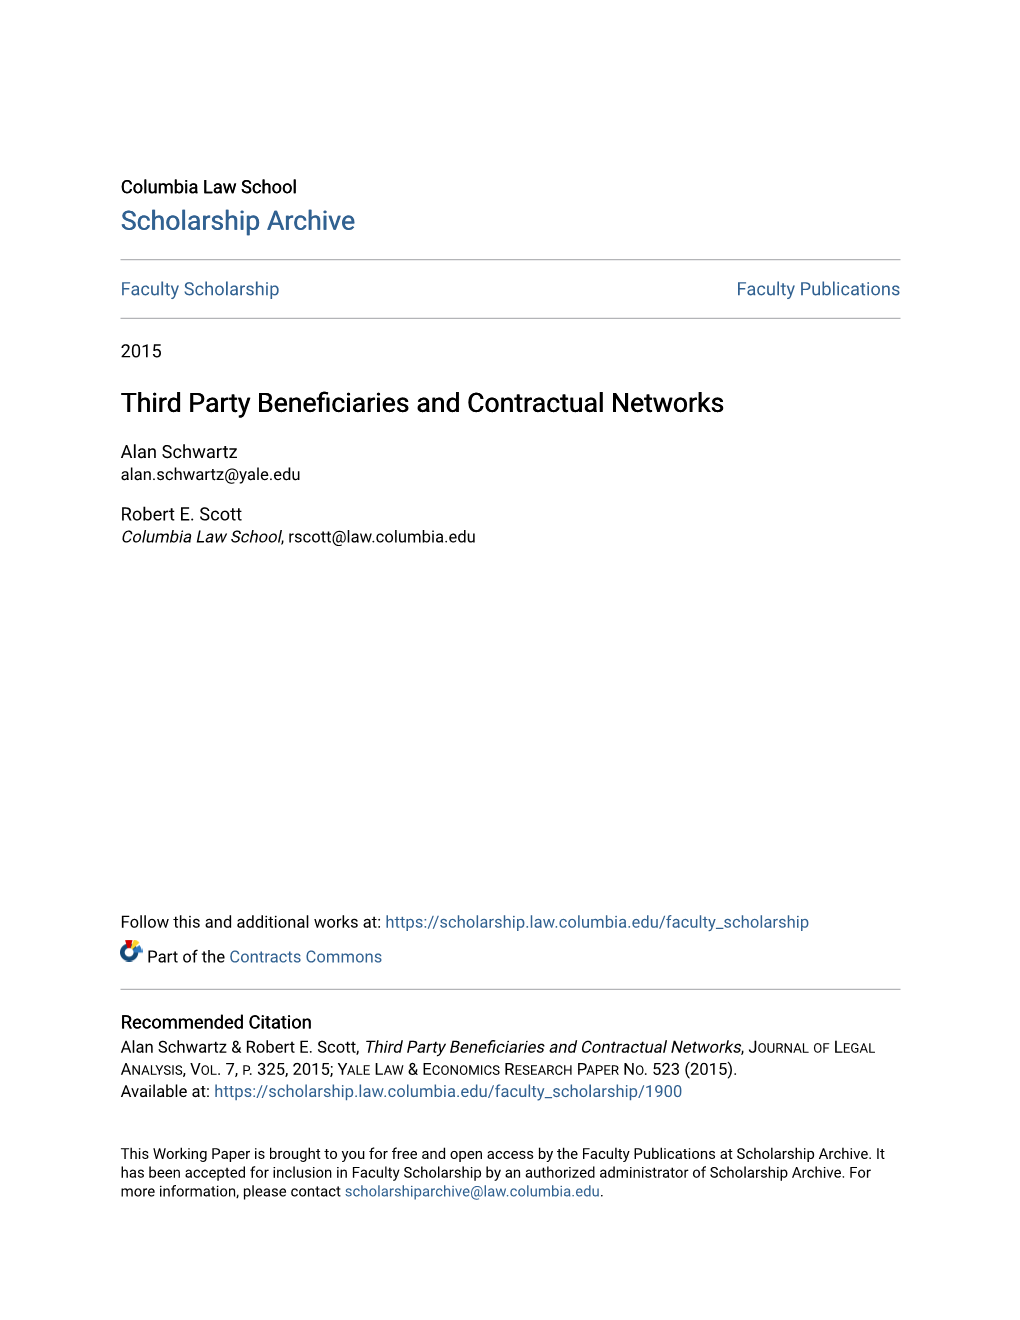 Third Party Beneficiaries and Contractual Networks